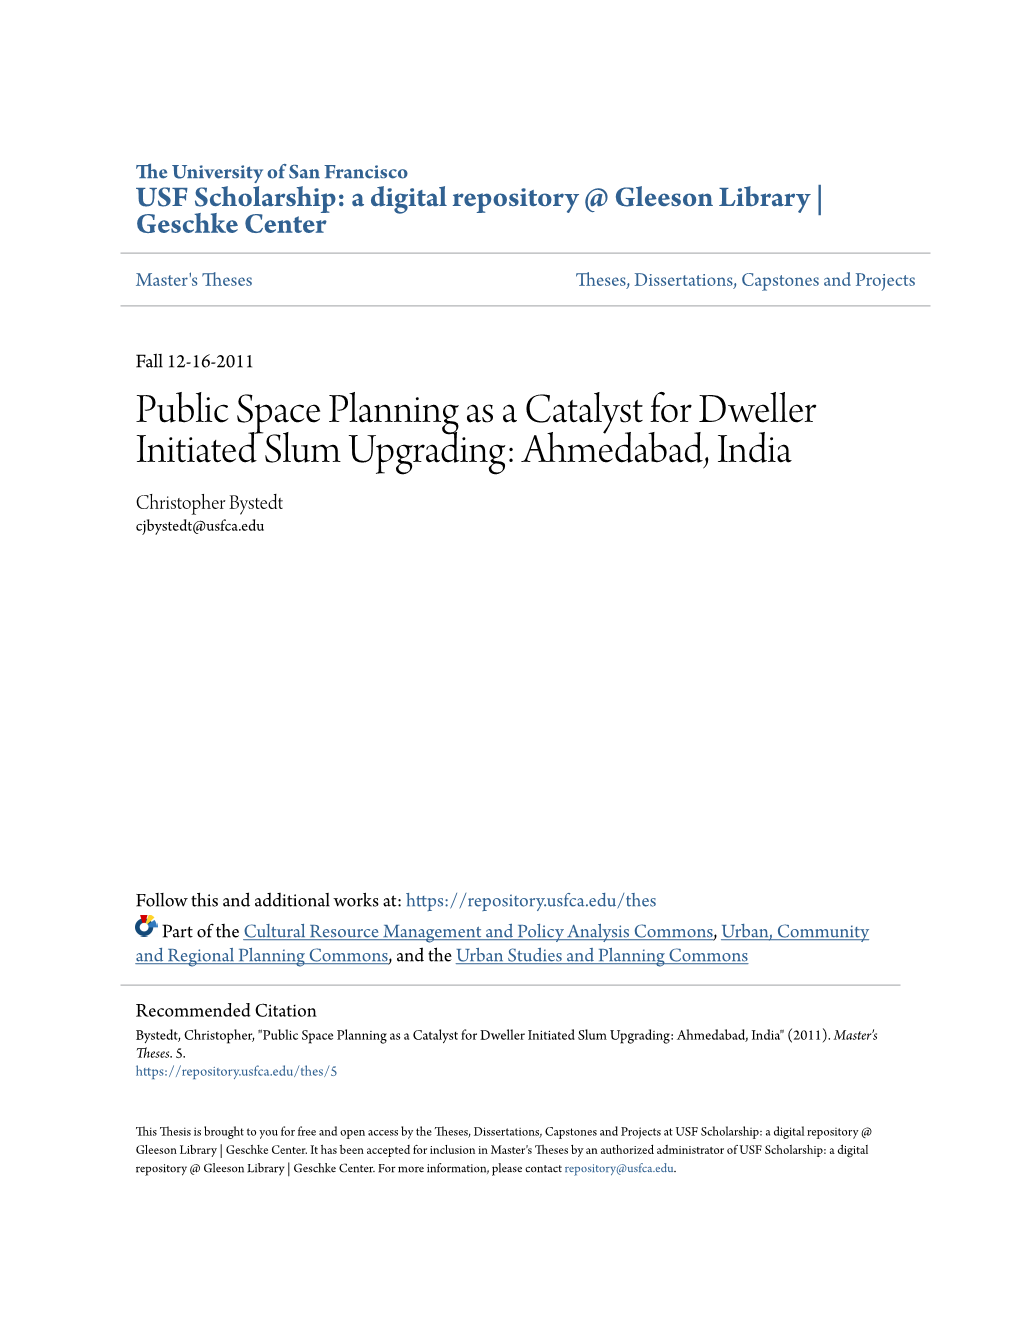 Public Space Planning As a Catalyst for Dweller Initiated Slum Upgrading: Ahmedabad, India Christopher Bystedt Cjbystedt@Usfca.Edu